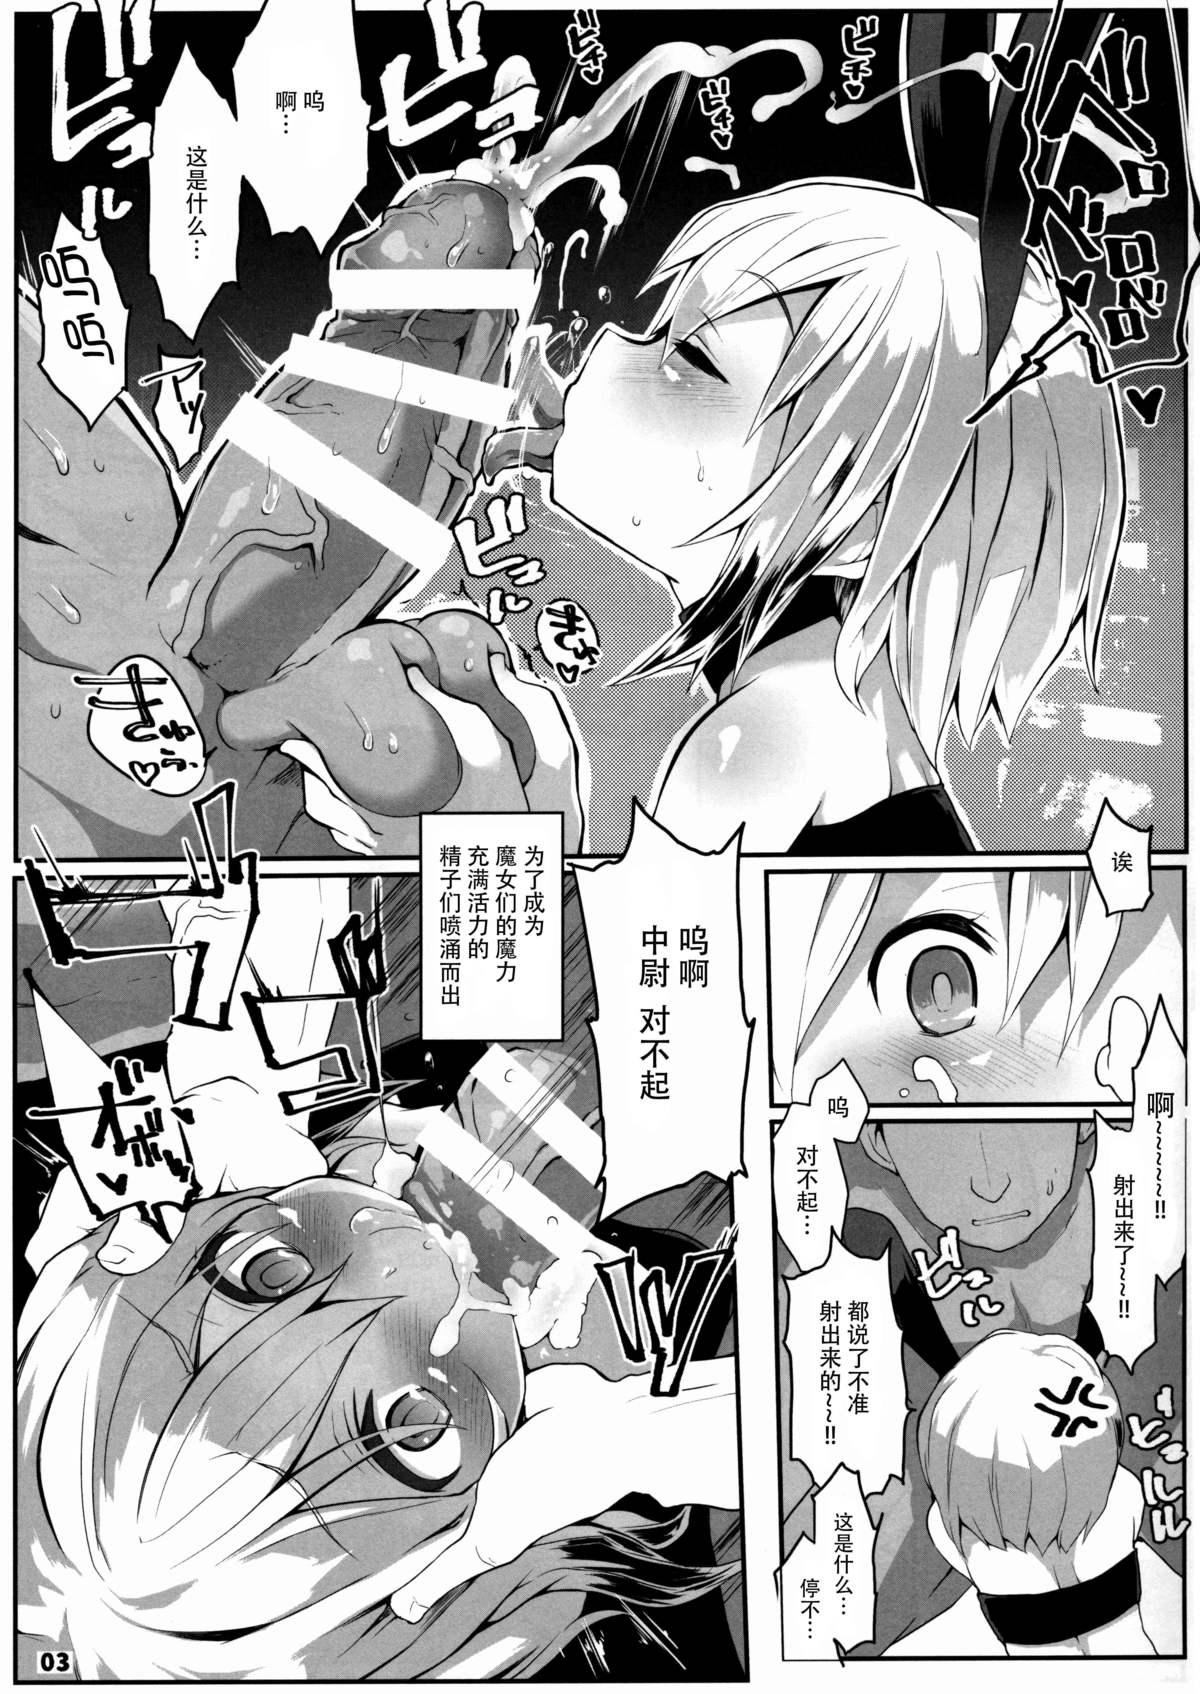 Fuck Com BULLOCK - Strike witches Hairy Pussy - Page 5